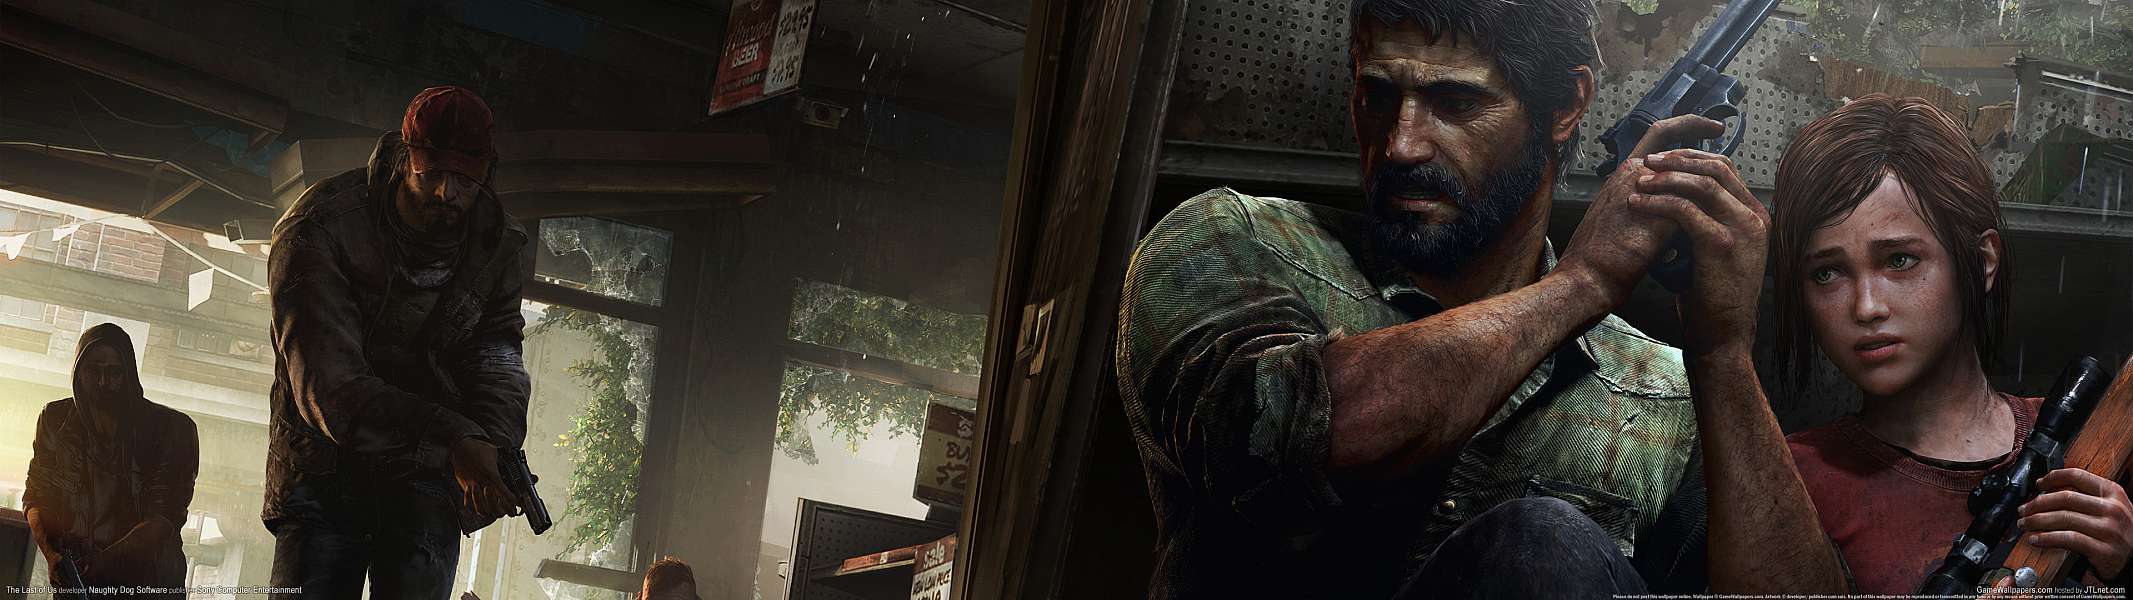 The Last of Us dual screen wallpaper or background